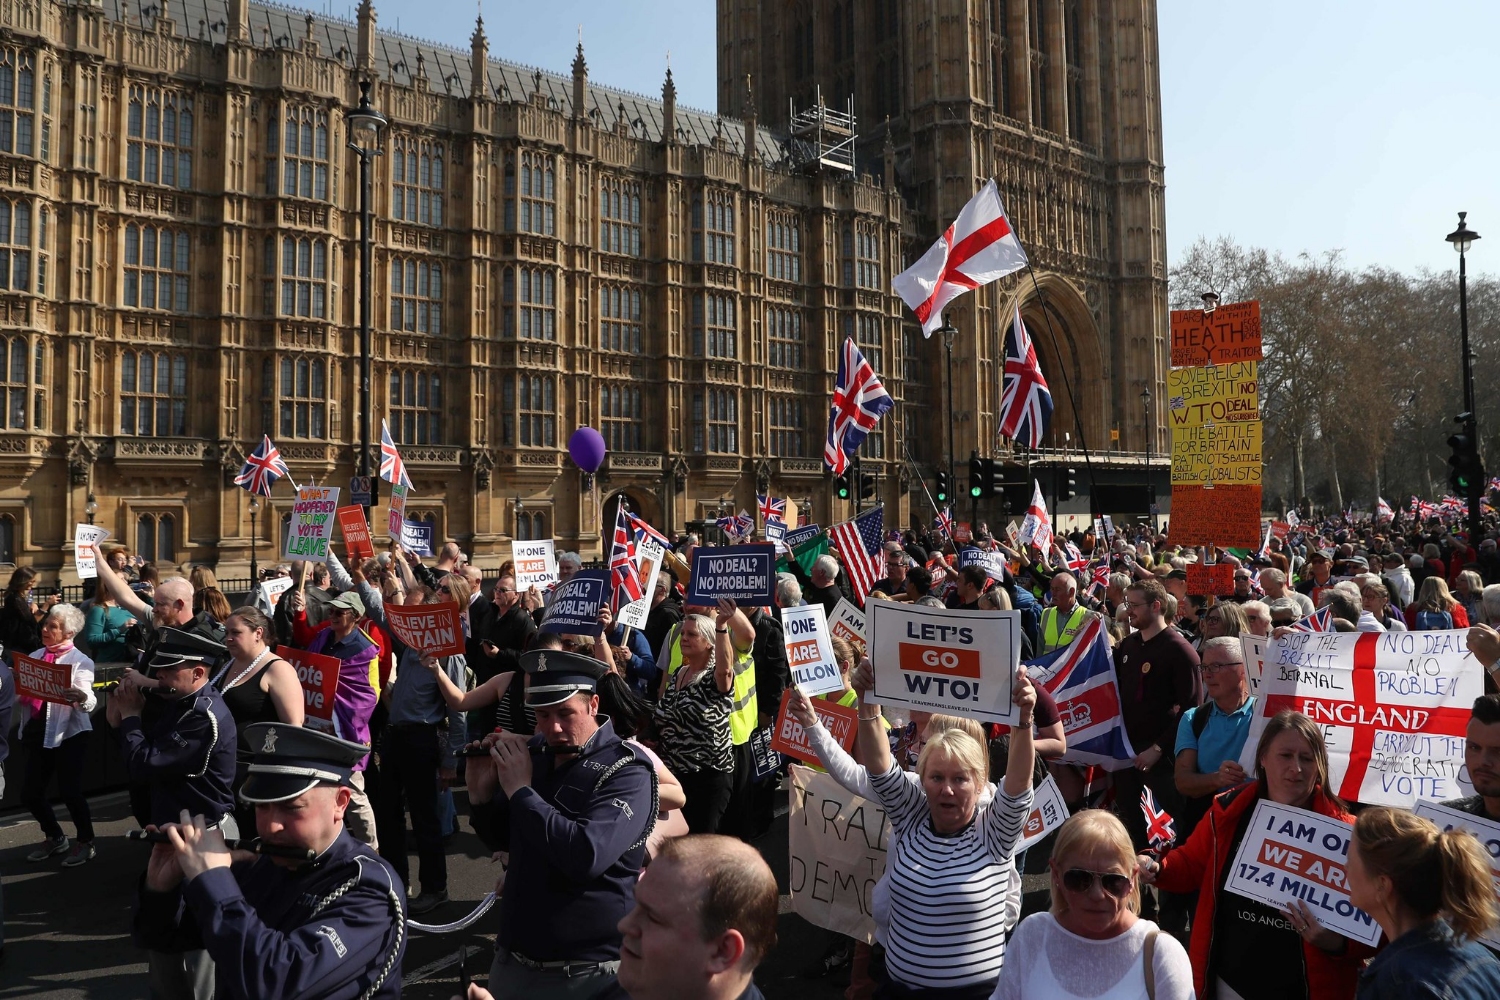 Brexit supporters demonstrated outside Parliament in London on Friday as lawmakers debated inside. Credit: Daniel Leal-Olivas/Agence France-Presse — Getty Images